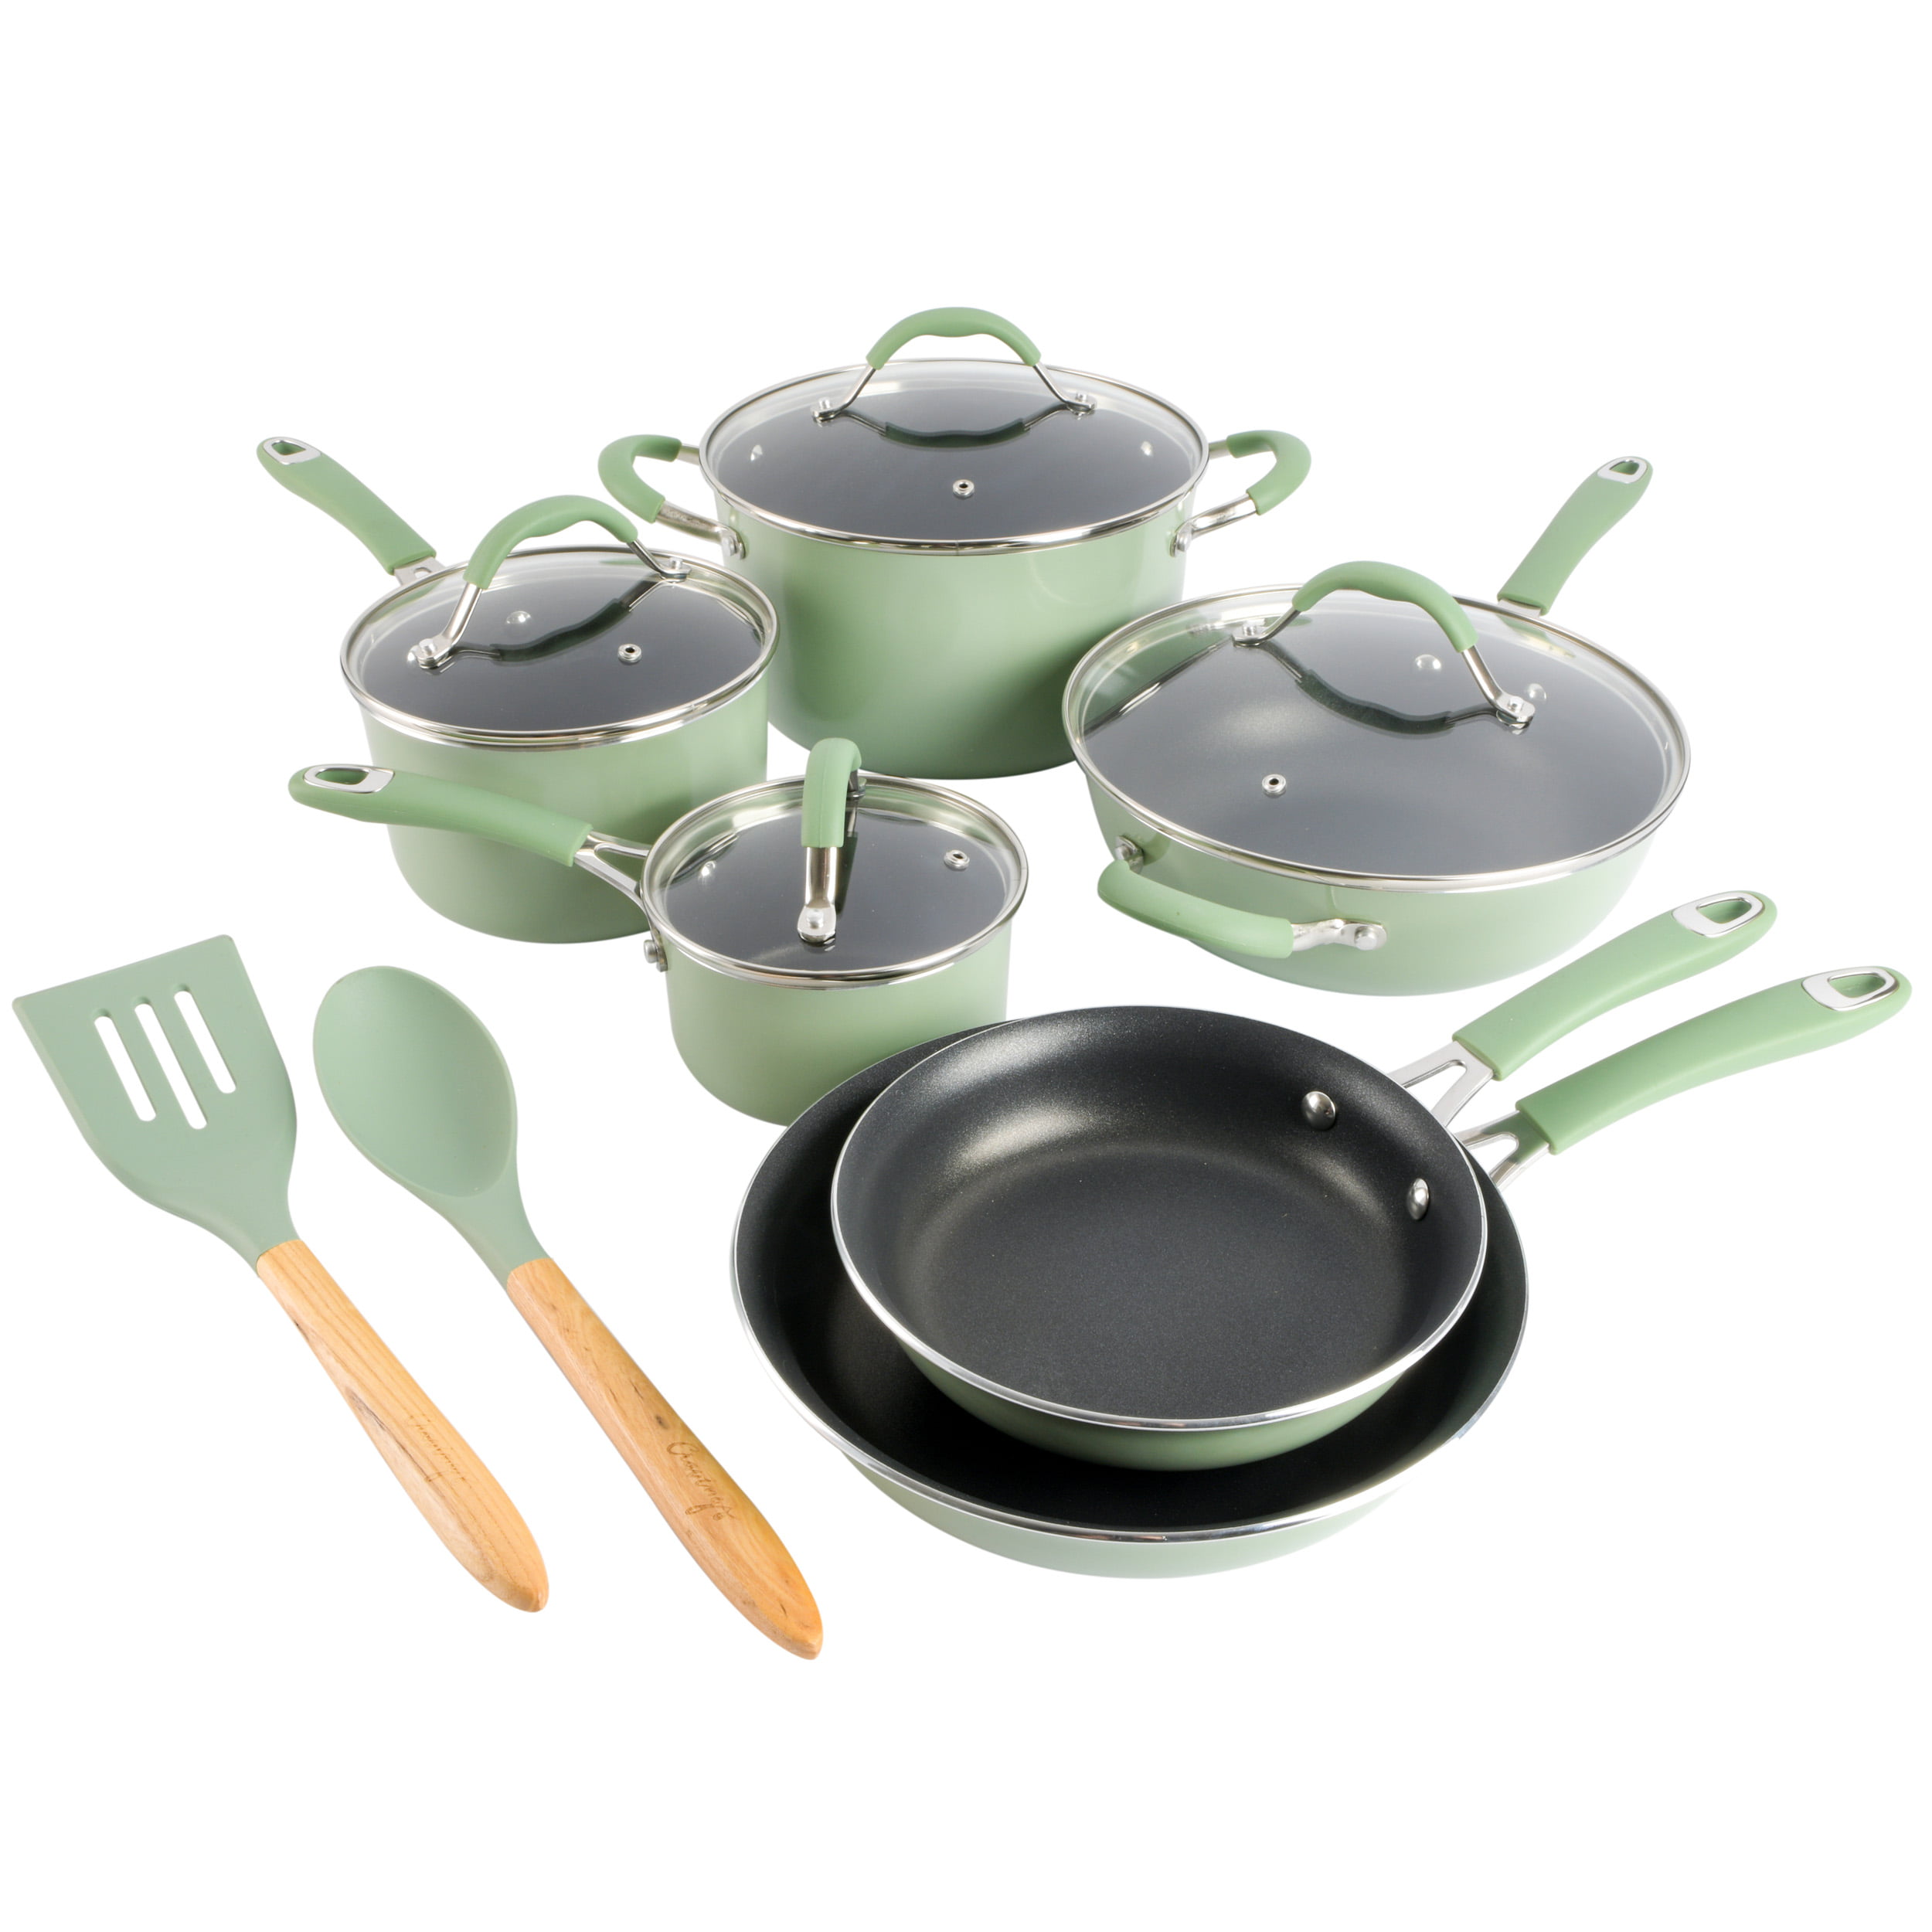 Cravings By Chrissy Teigen 12 Piece Nonstick Aluminum Cookware Set in  Pistachio with Silicone Handles